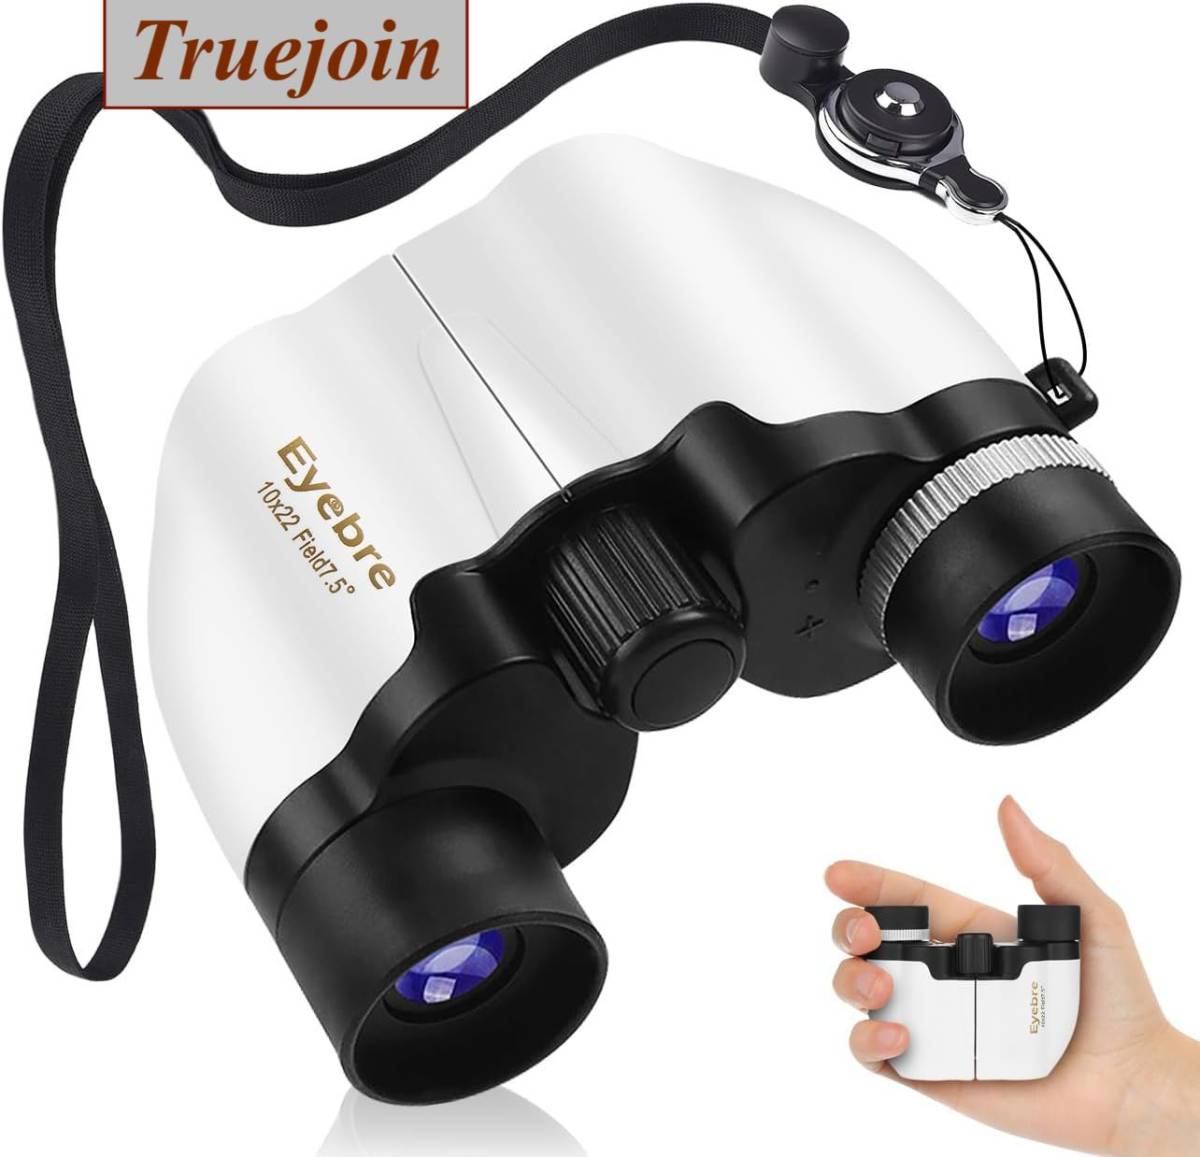  binoculars Live for concert 10 times opera glasses super light weight child . woman optimum eyes width adjustment blurring correction life waterproof length hour. use also fatigue difficult 